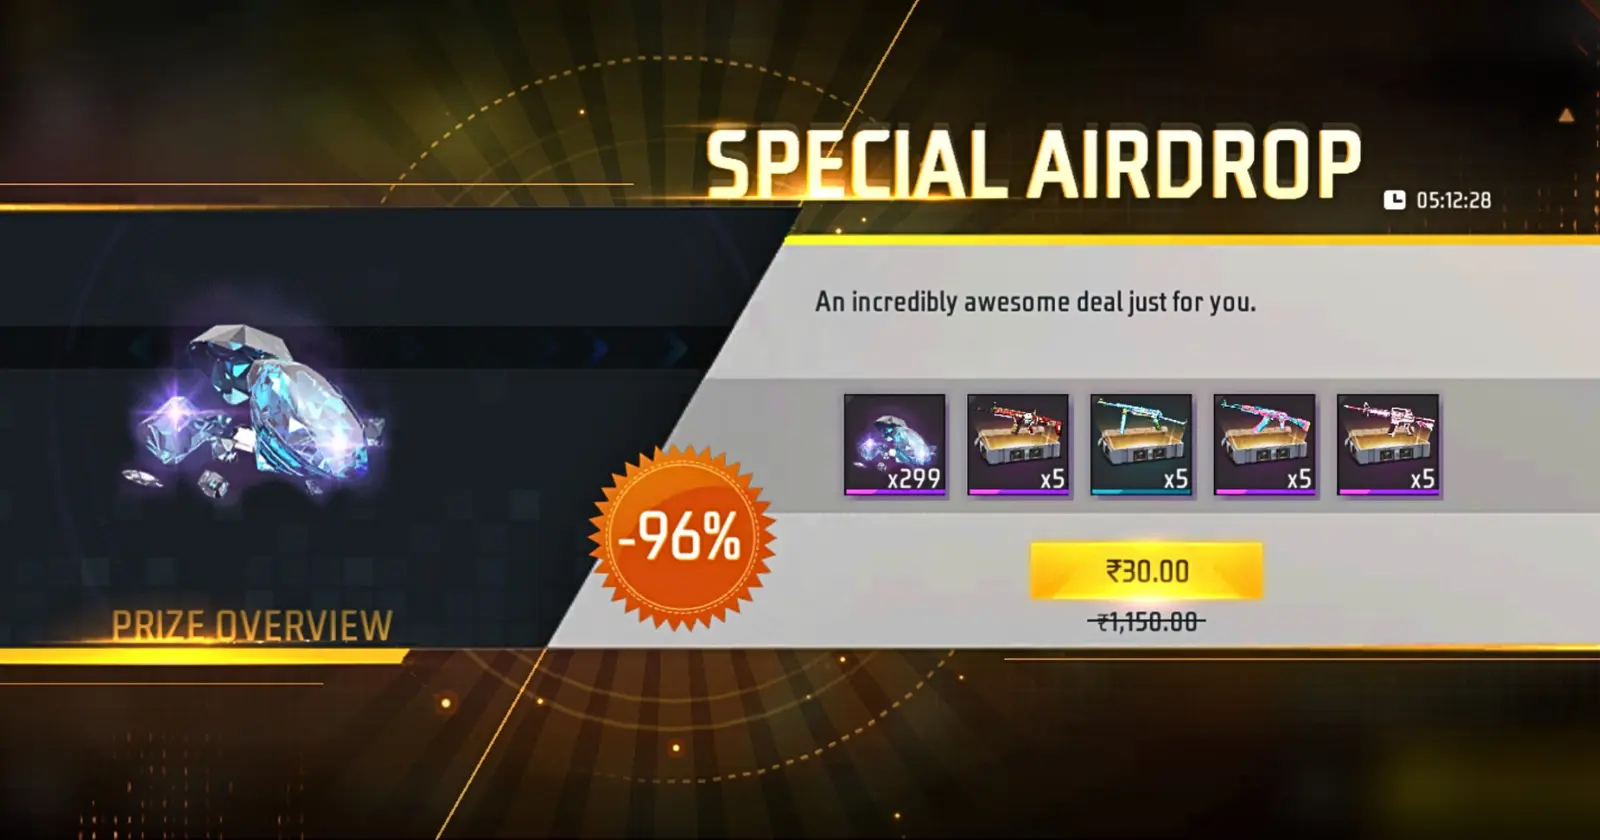 30 rupees special airdrop offer in Free Fire, 96% off on items, ₹30 instead of ₹1150, huge savings on game items.